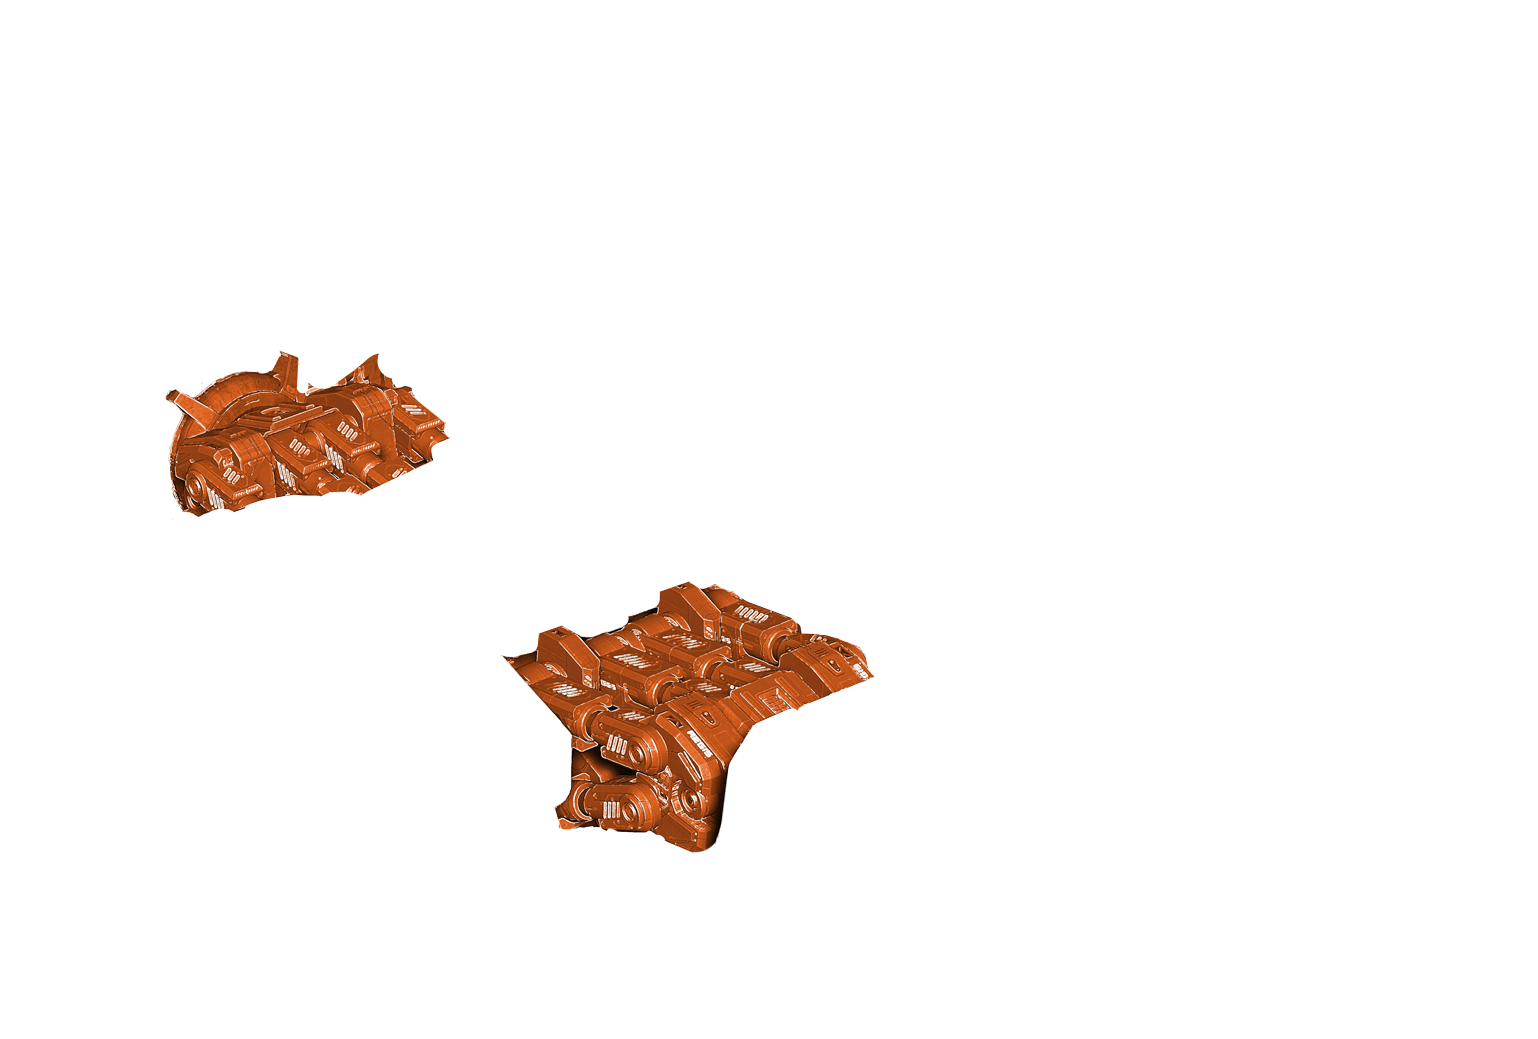 Artistic view of "Reclaimer Best In Show Edition"